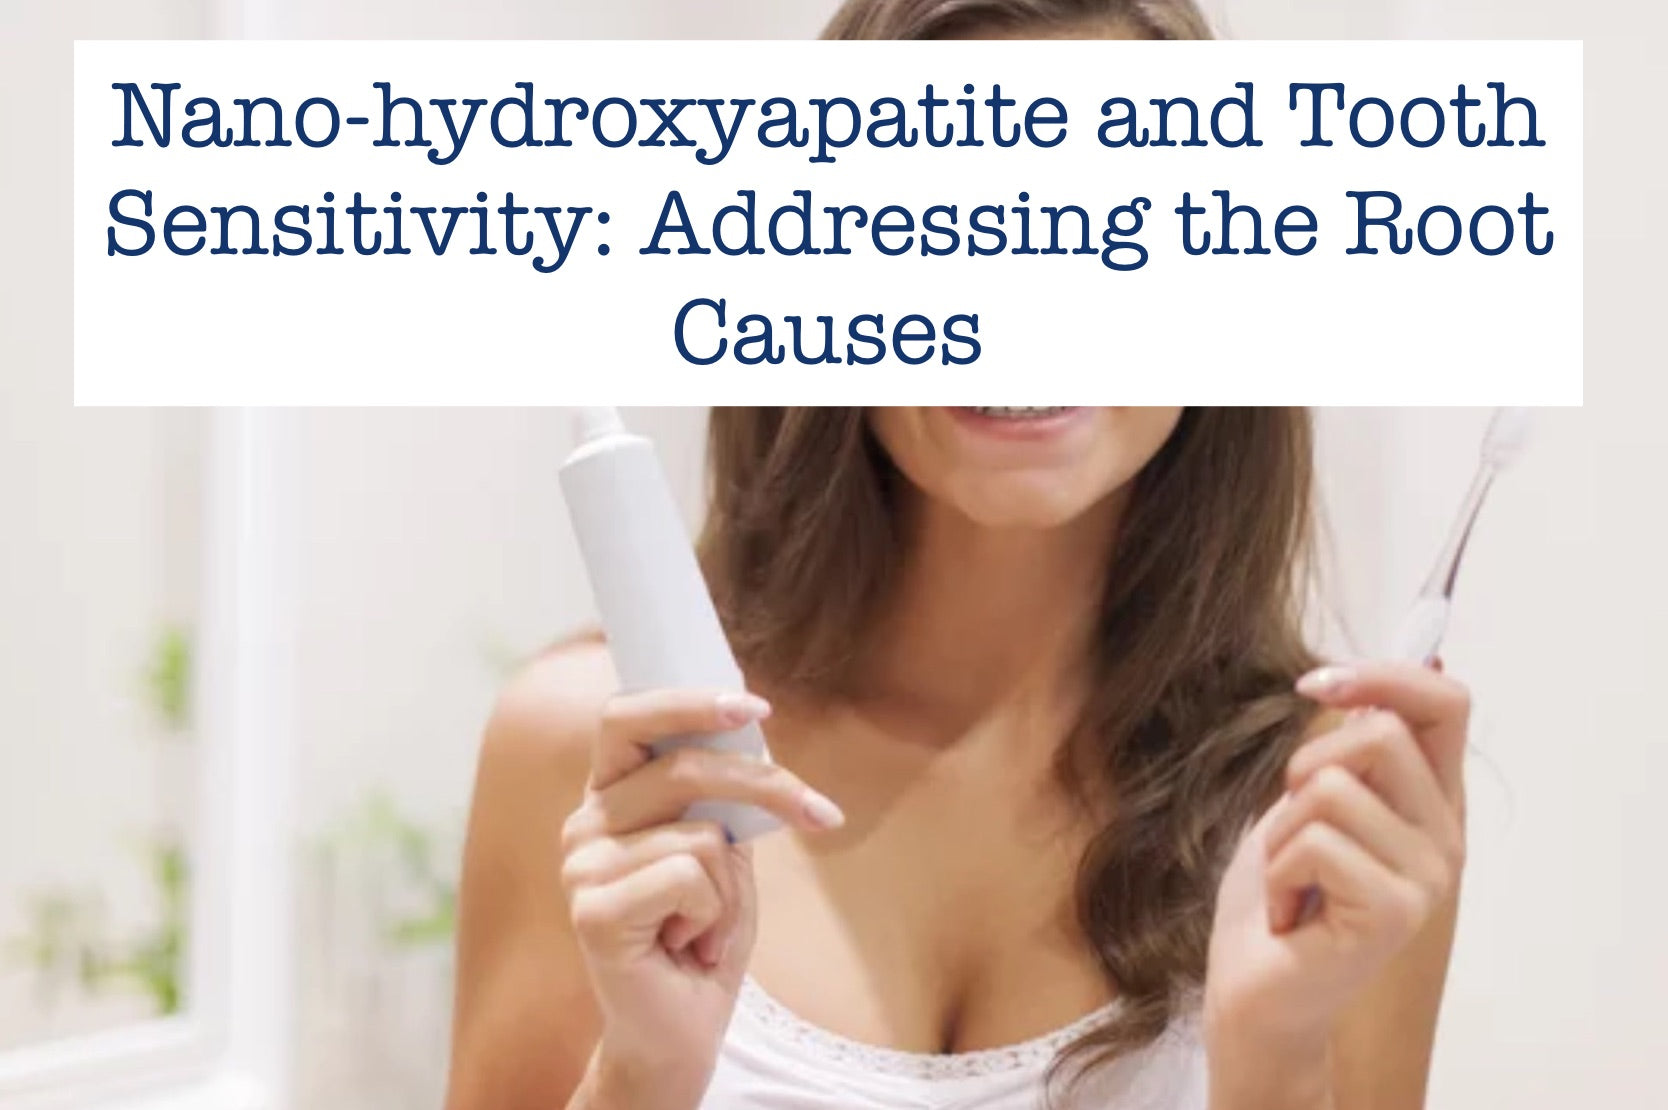 Nano-hydroxyapatite and Tooth Sensitivity: Addressing the Root Causes